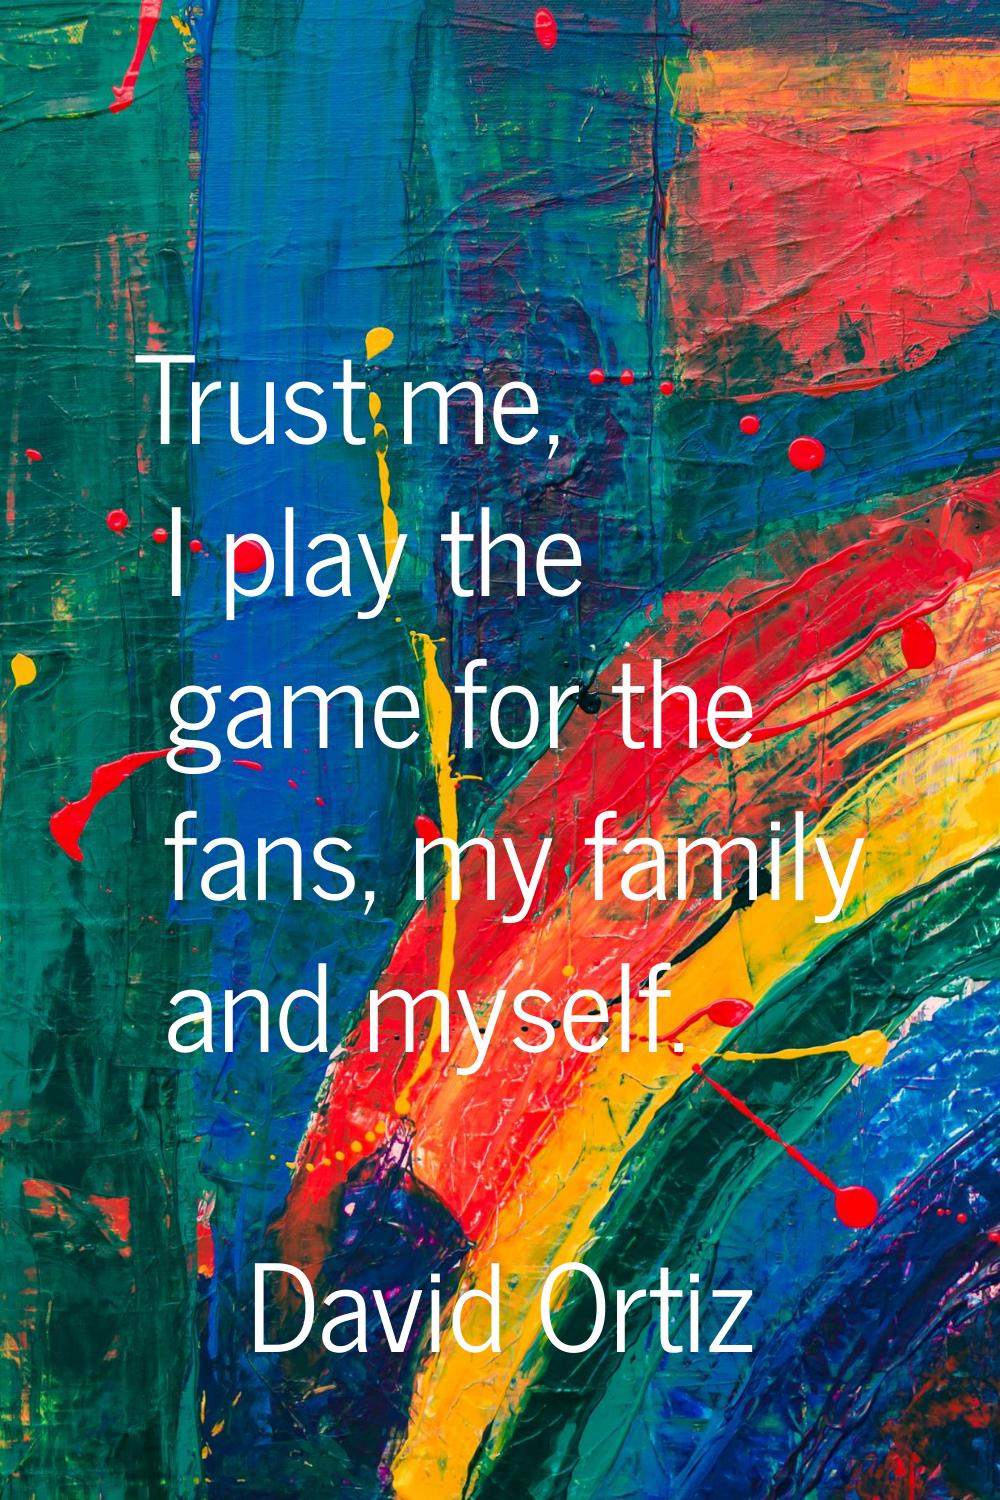 Trust me, I play the game for the fans, my family and myself.